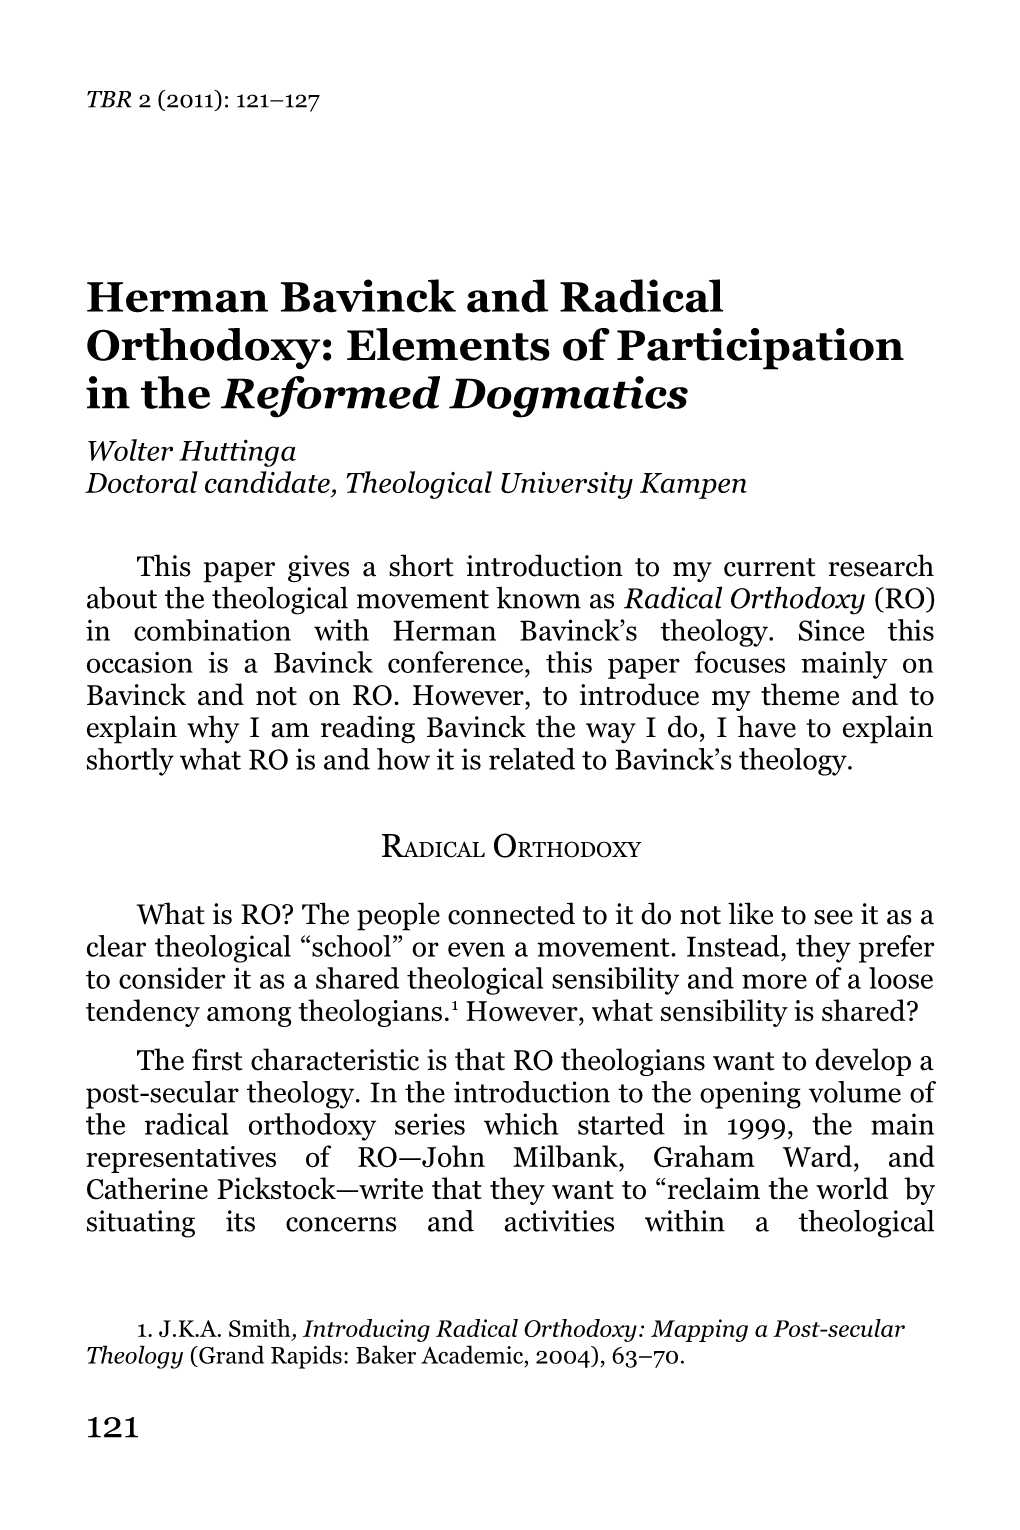 Herman Bavinck and Radical Orthodoxy: Elements of Participation in the Reformed Dogmatics Wolter Huttinga Doctoral Candidate, Theological University Kampen